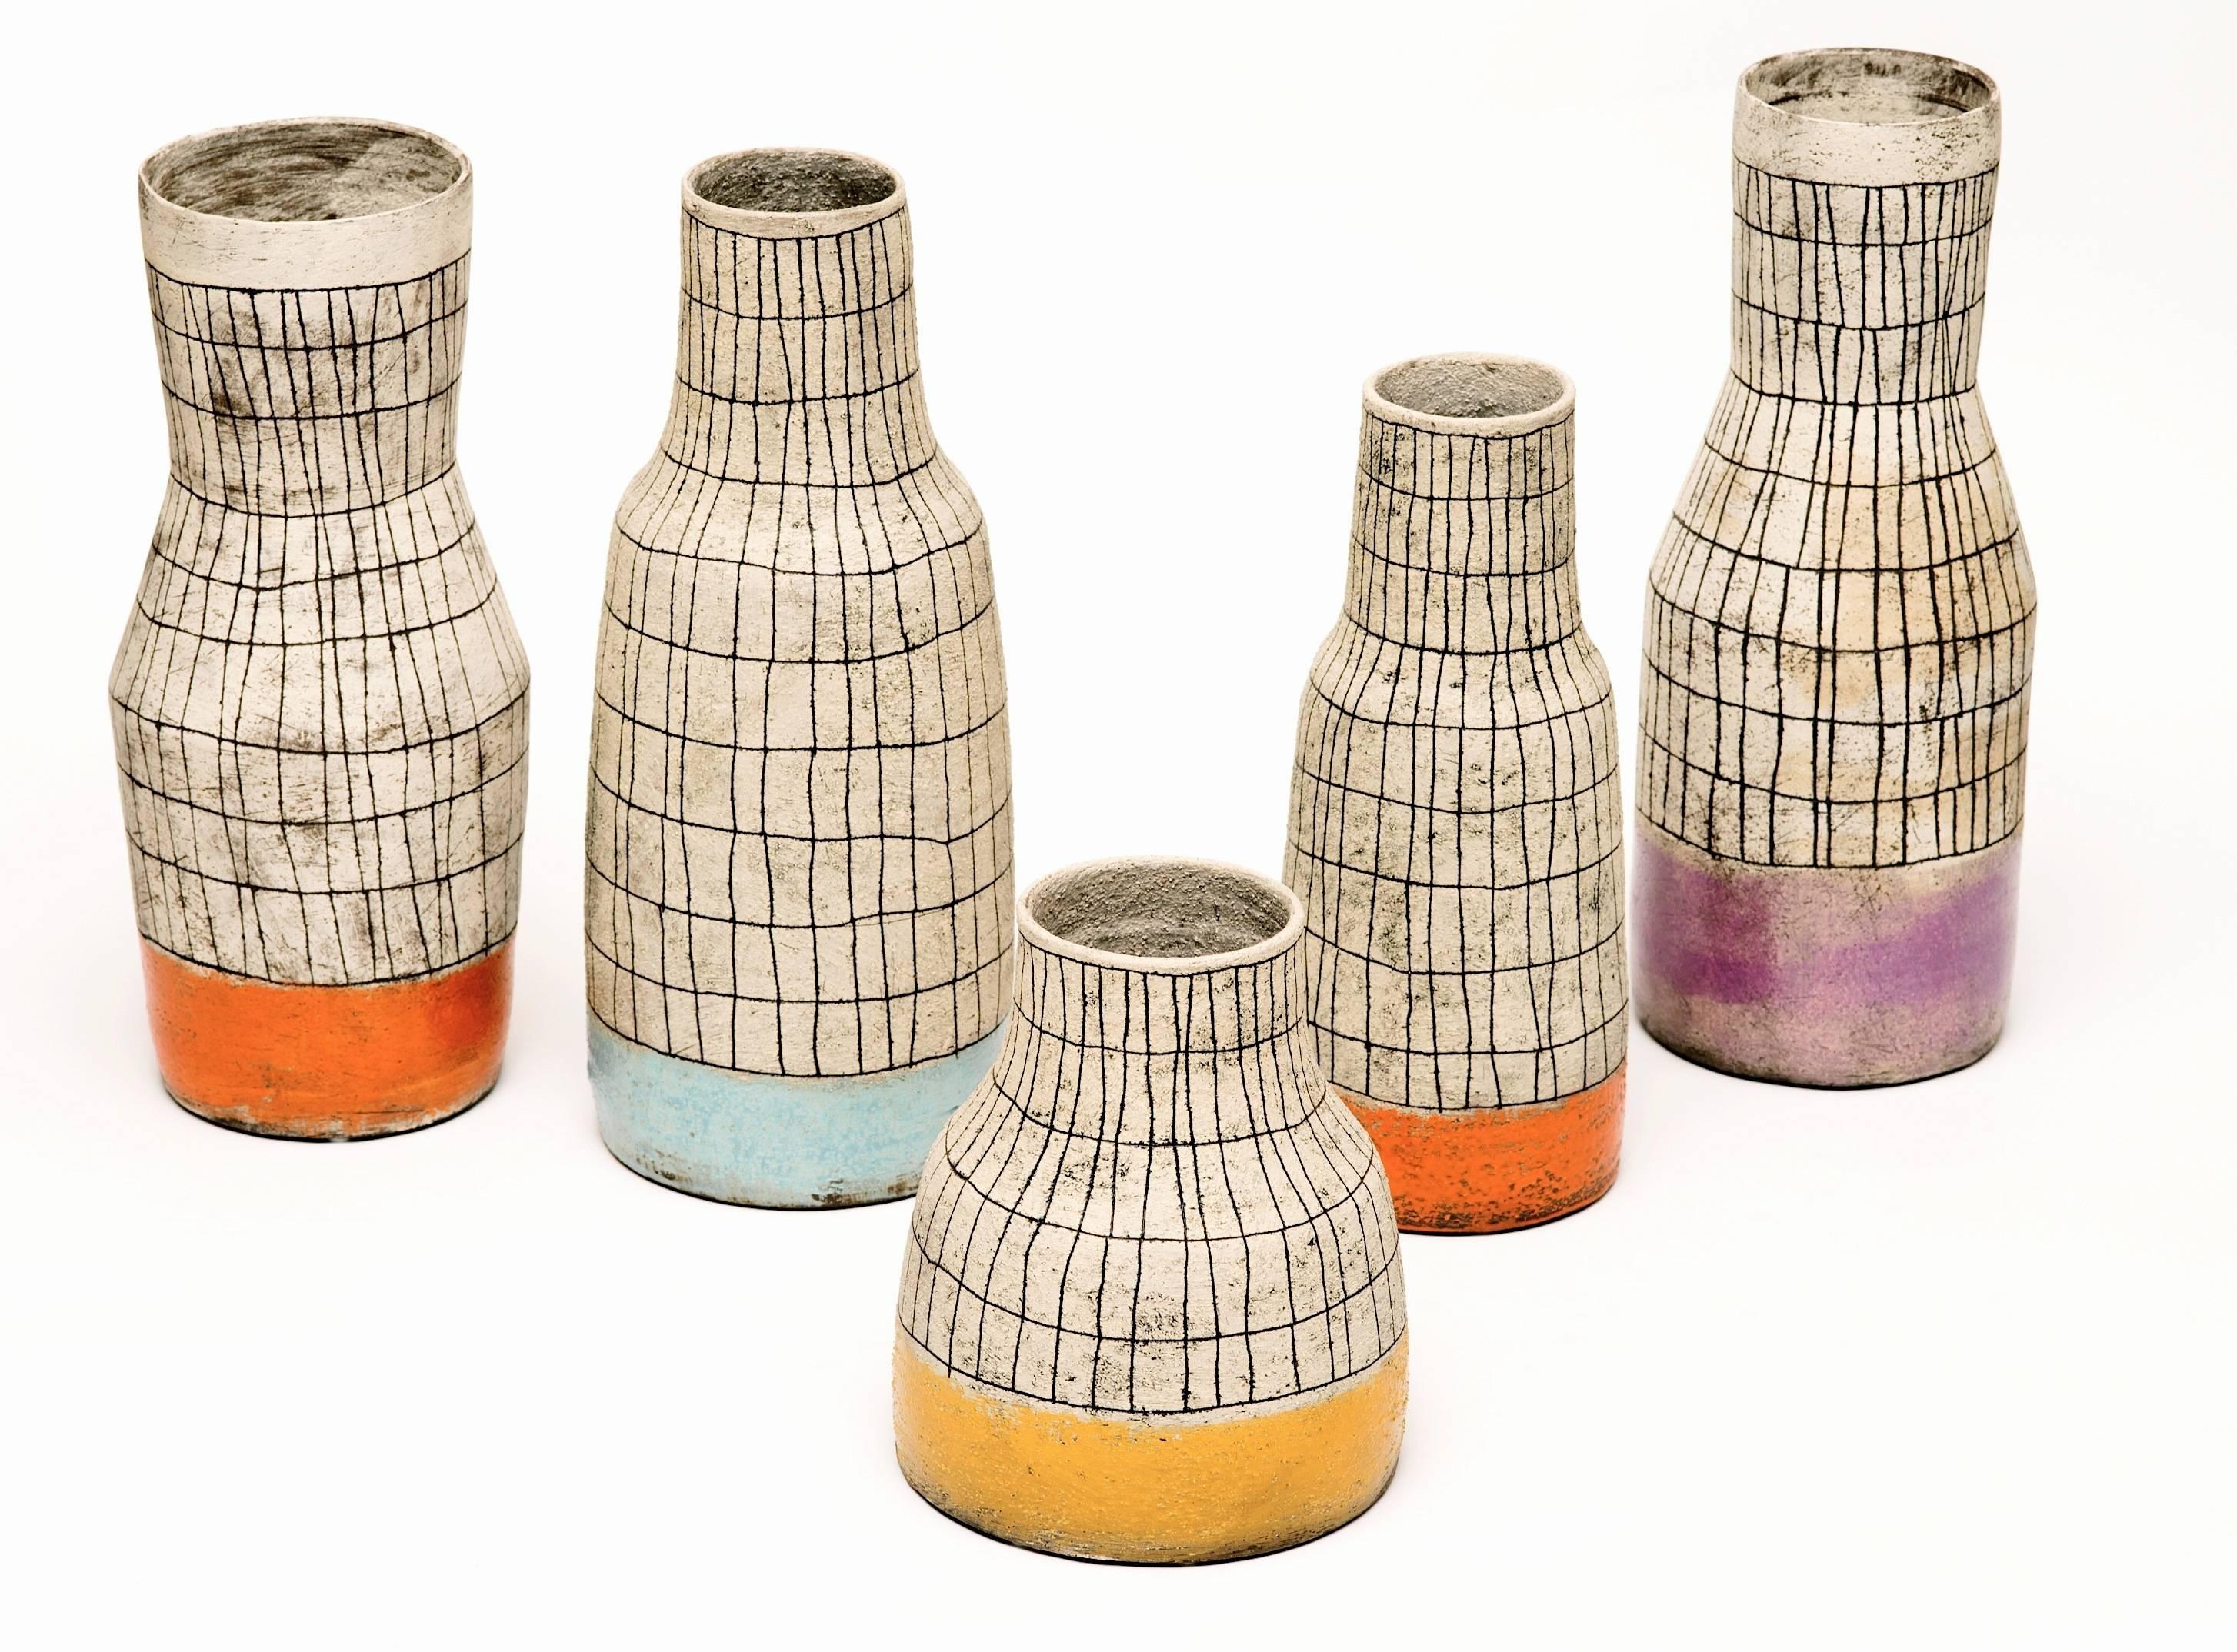 Contemporary Hand-Painted Ceramic Vases with a Mid Century Design 4